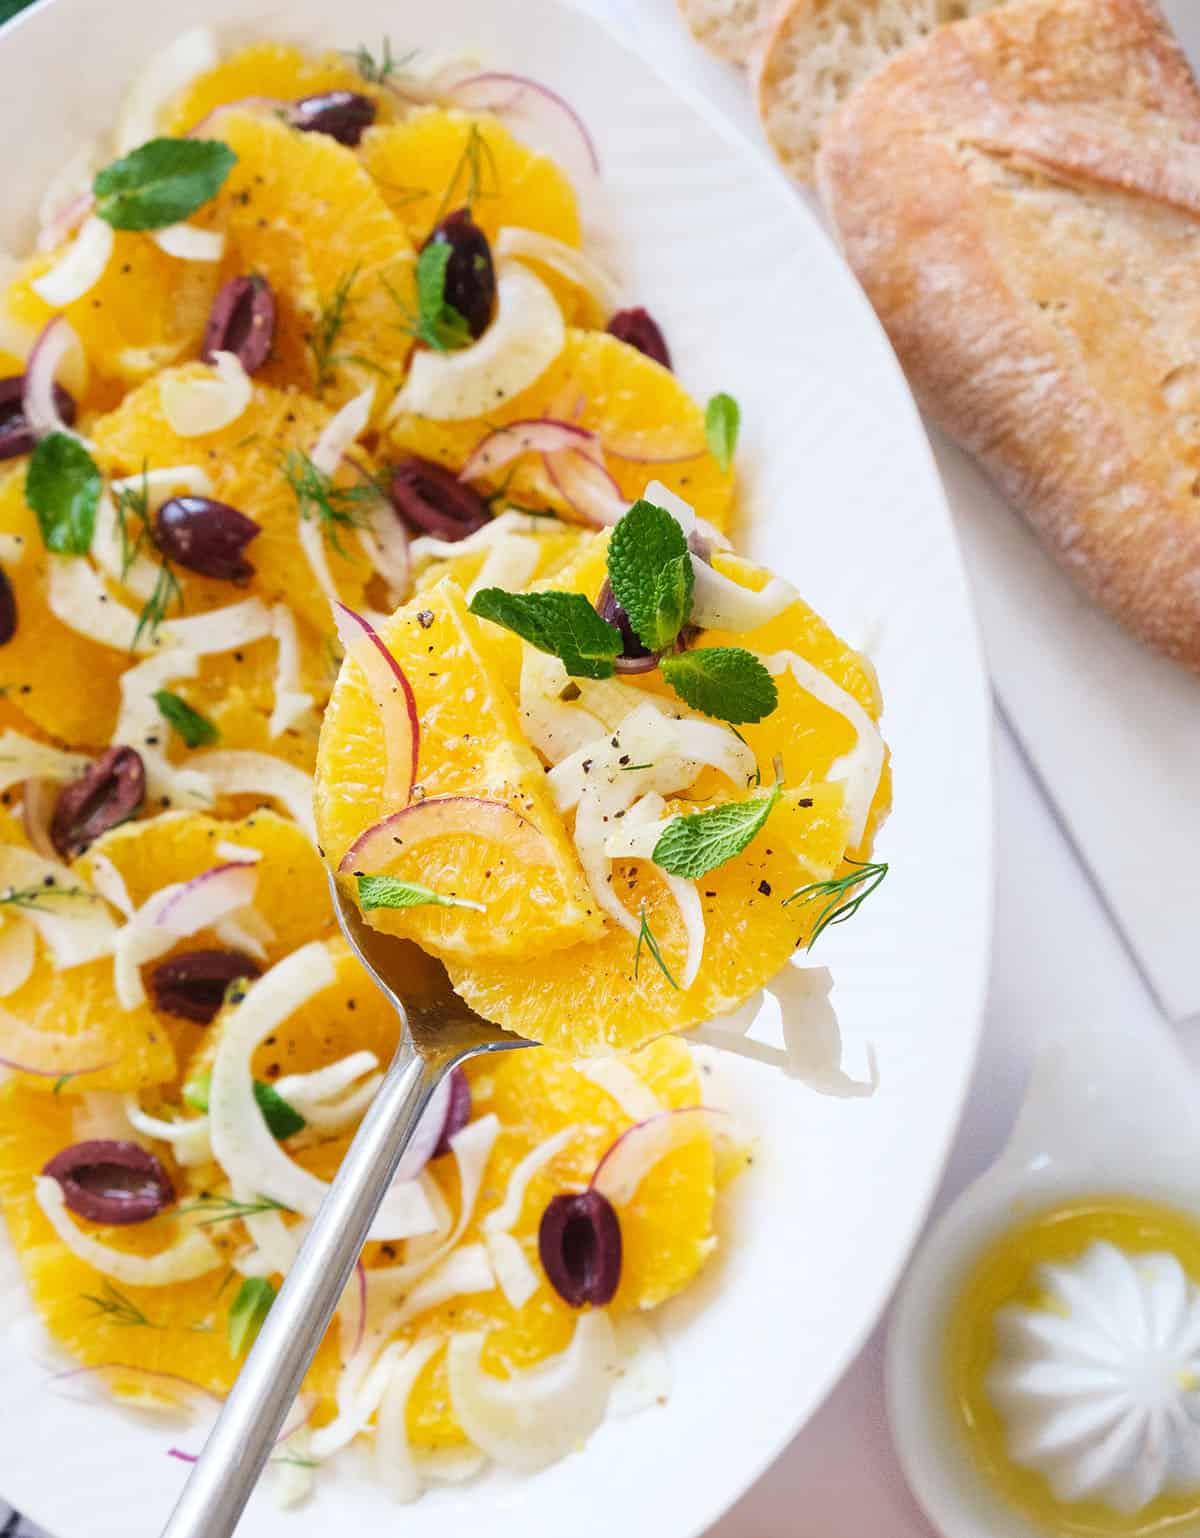 Top view of a white serving plate full of orange salad with mint leaves, olives and fennel.